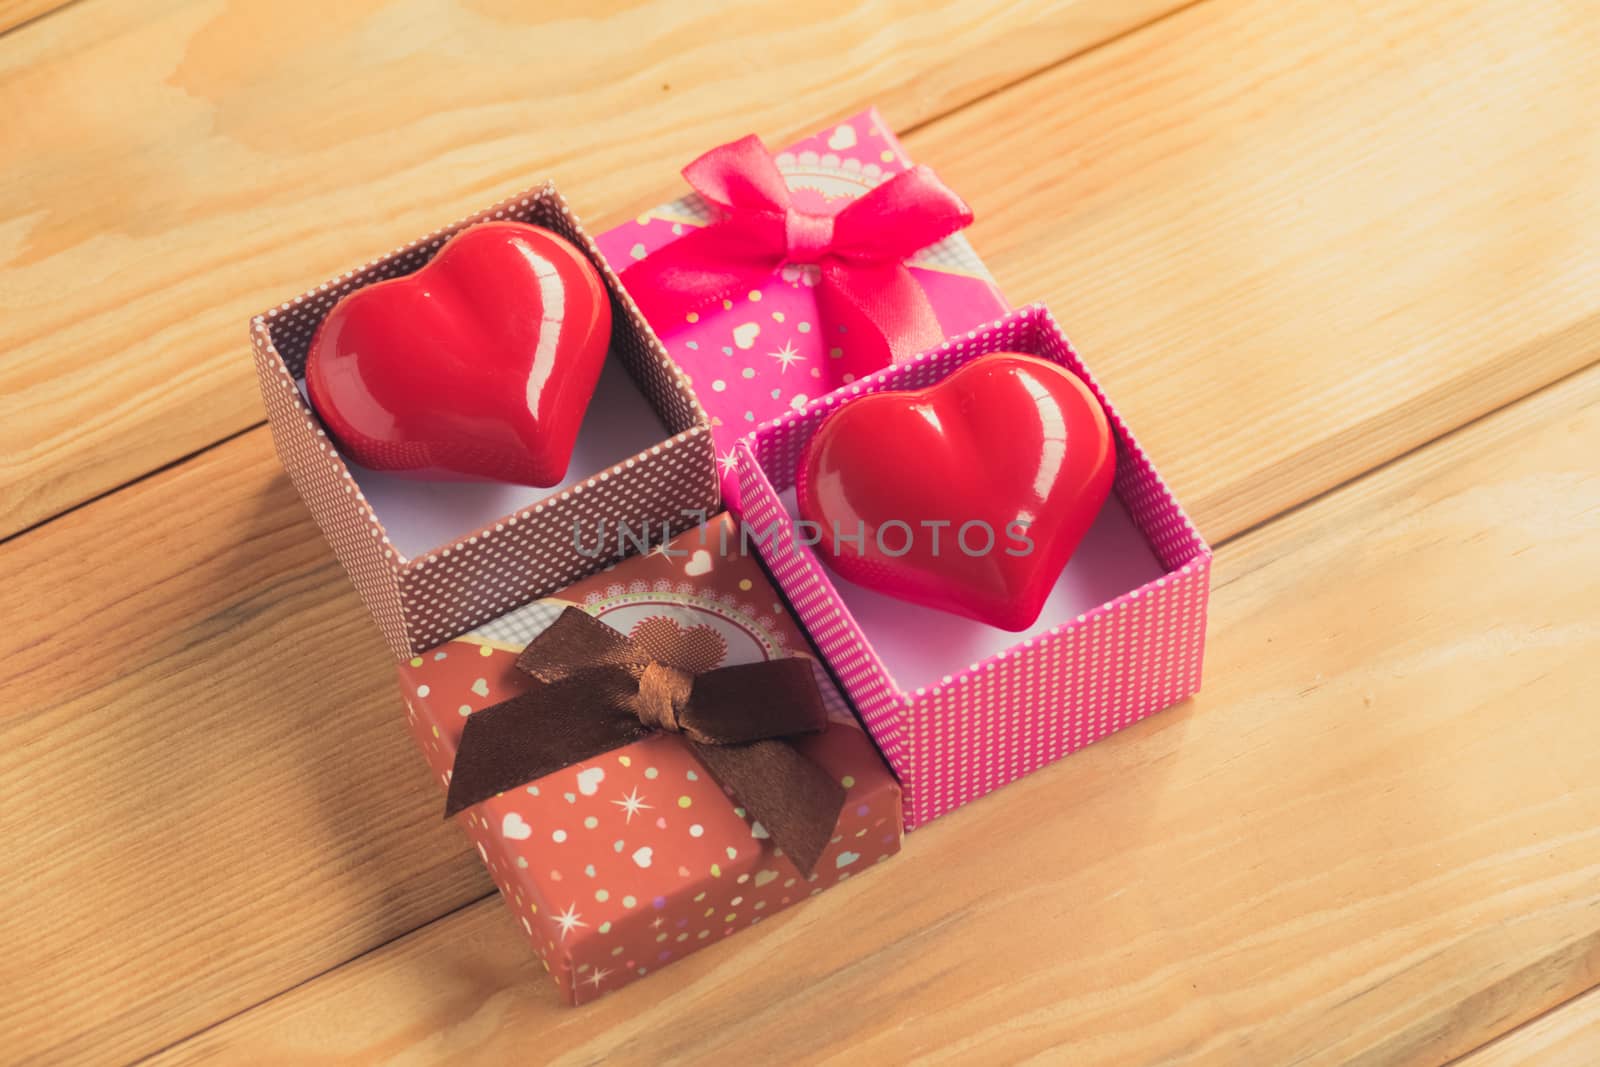 Gift of love. hearty gift. A gift box with a red heart inside. by teerawit